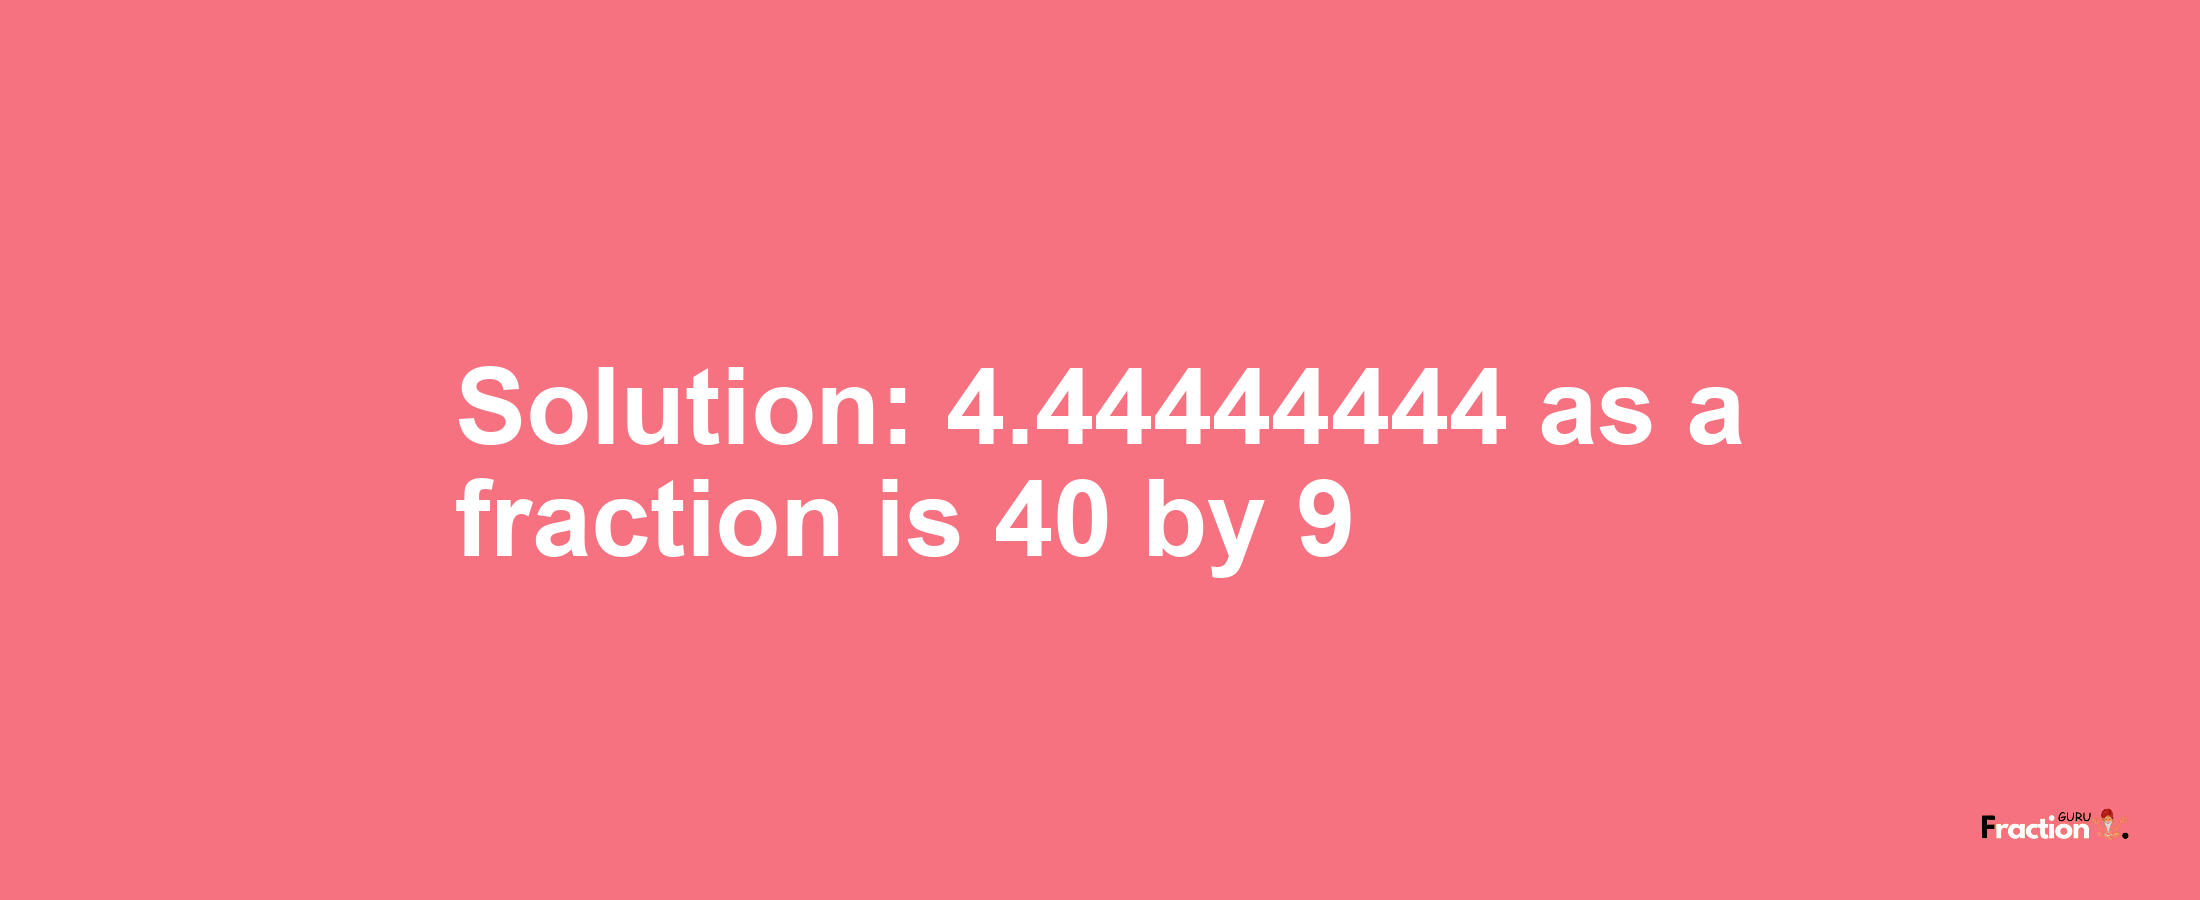 Solution:4.44444444 as a fraction is 40/9